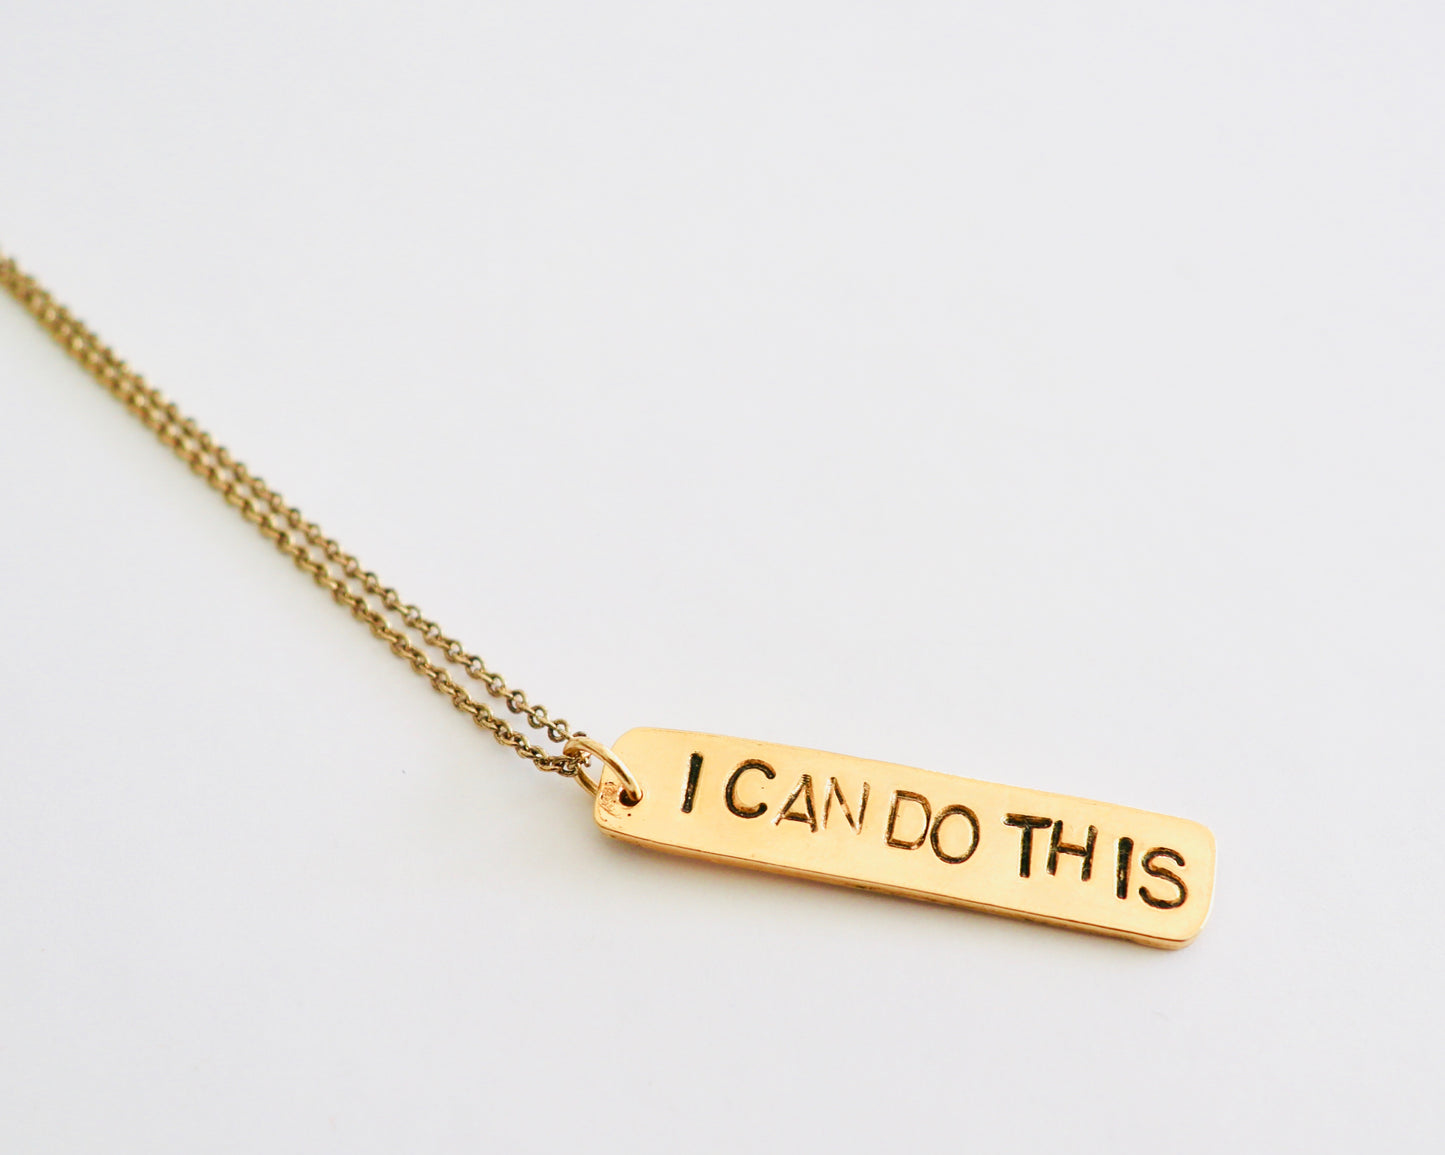 I CAN DO THIS NECKLACE